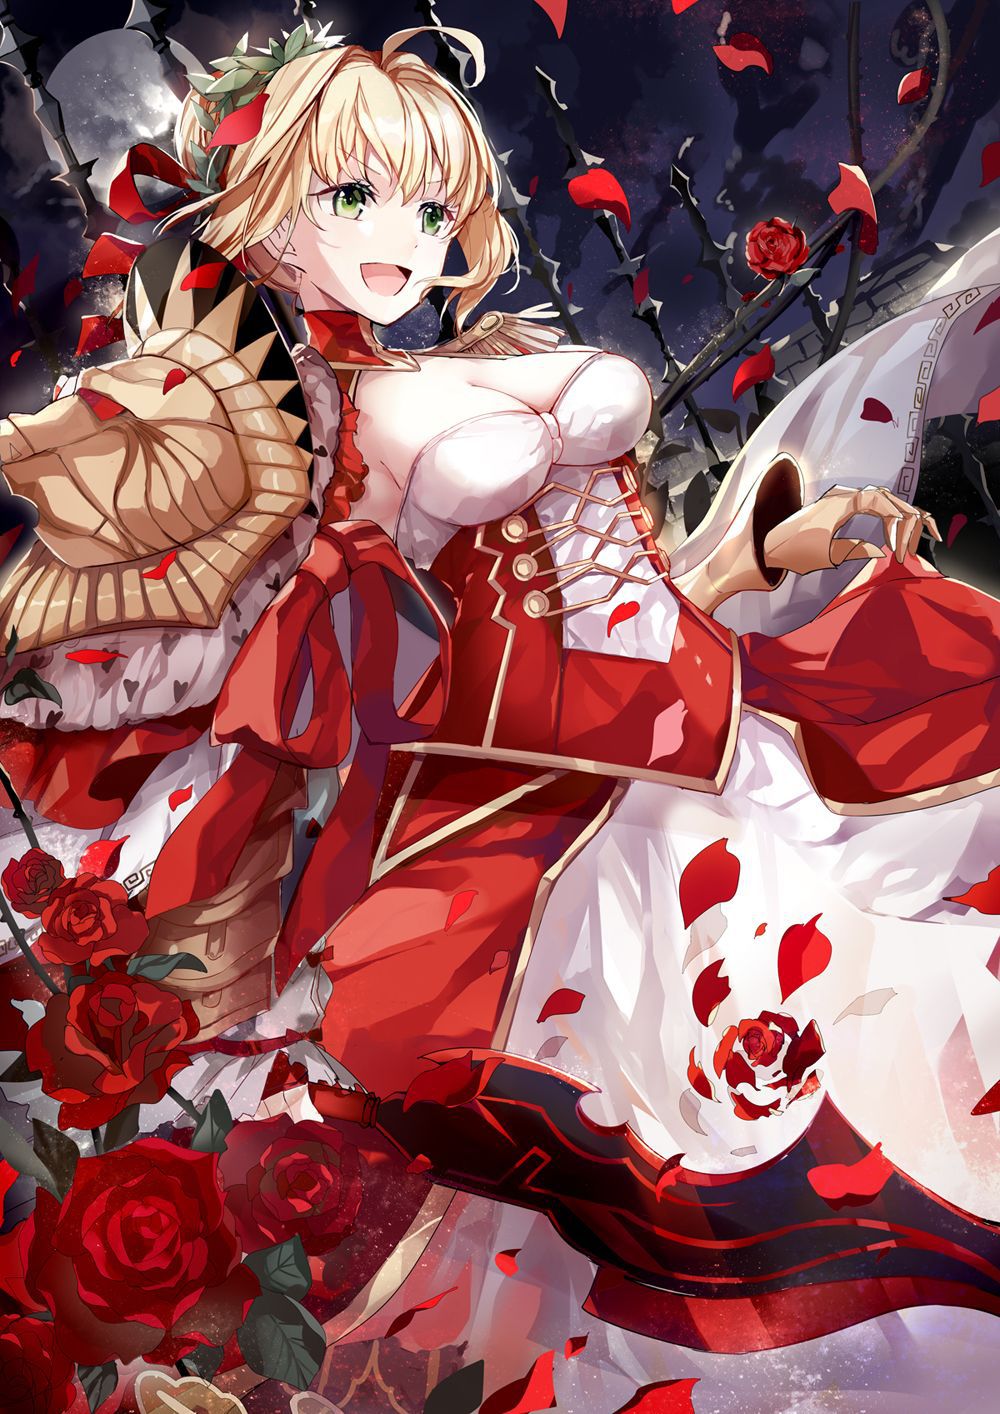 [Secondary ZIP] is about to start anime 100 pieces of cute image summary of Nero Claudius so soon 28